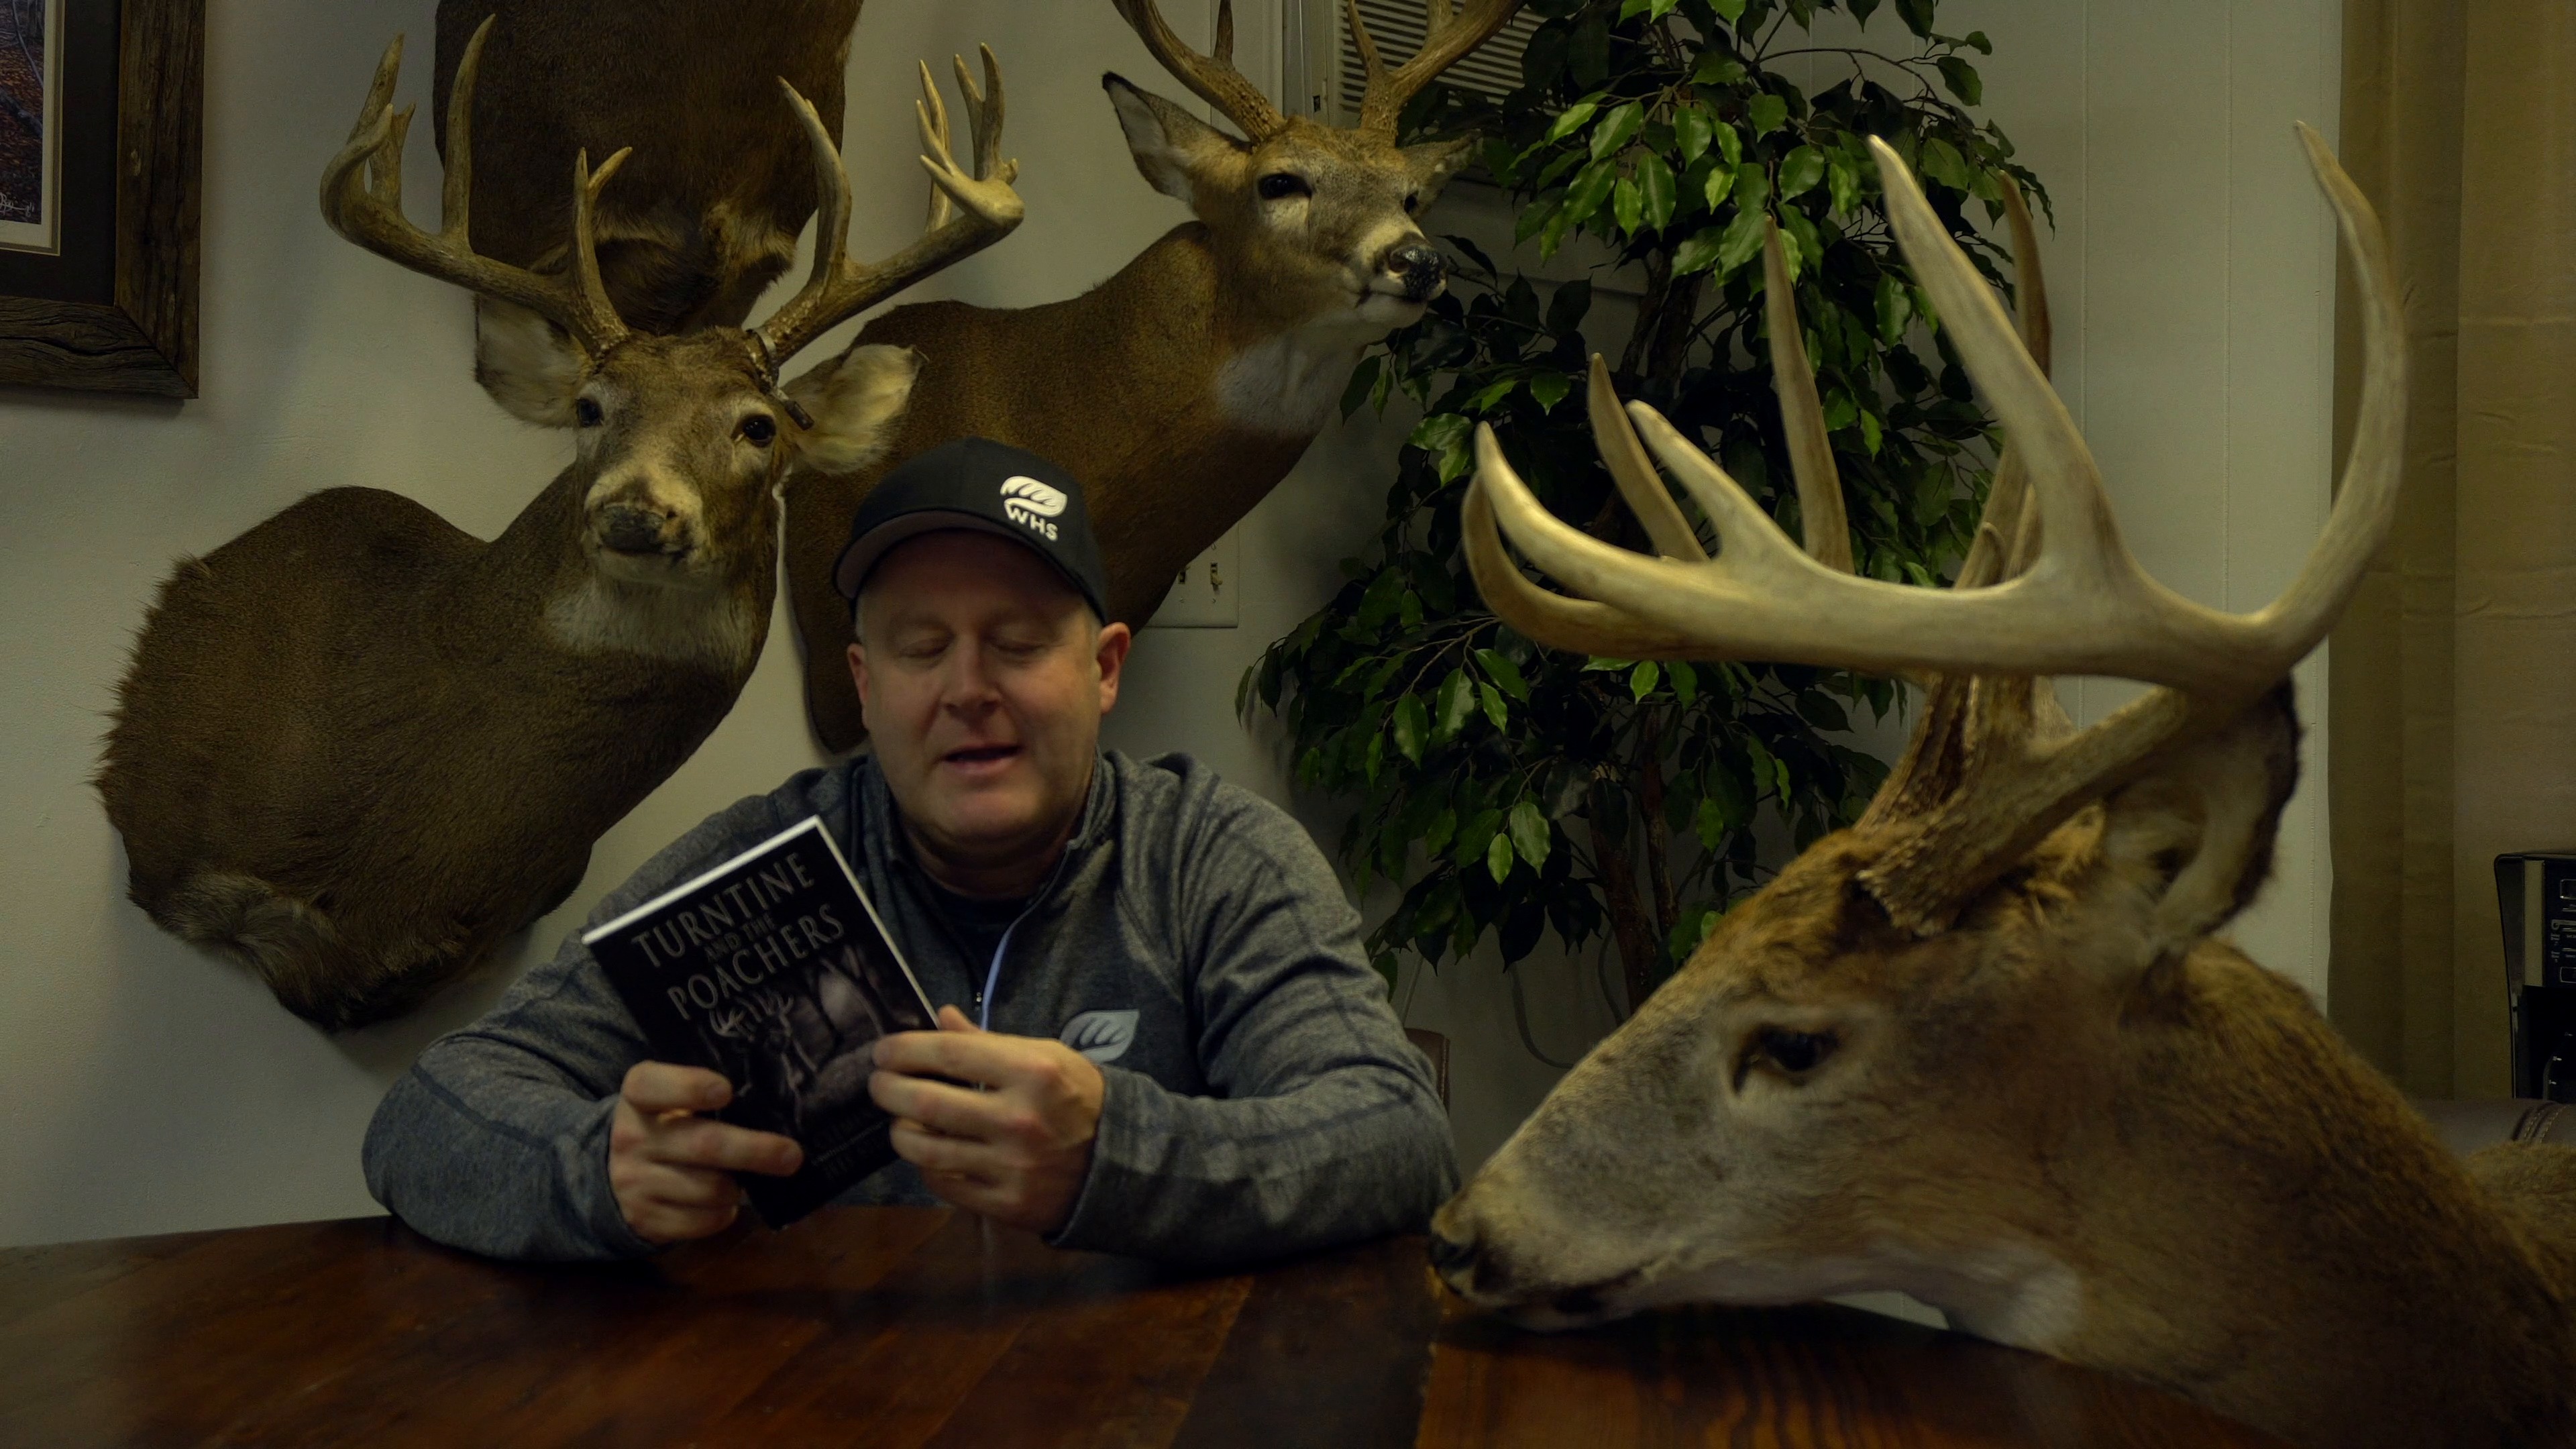 "Turntine and the Poachers" Whitetail Adventure Series Book